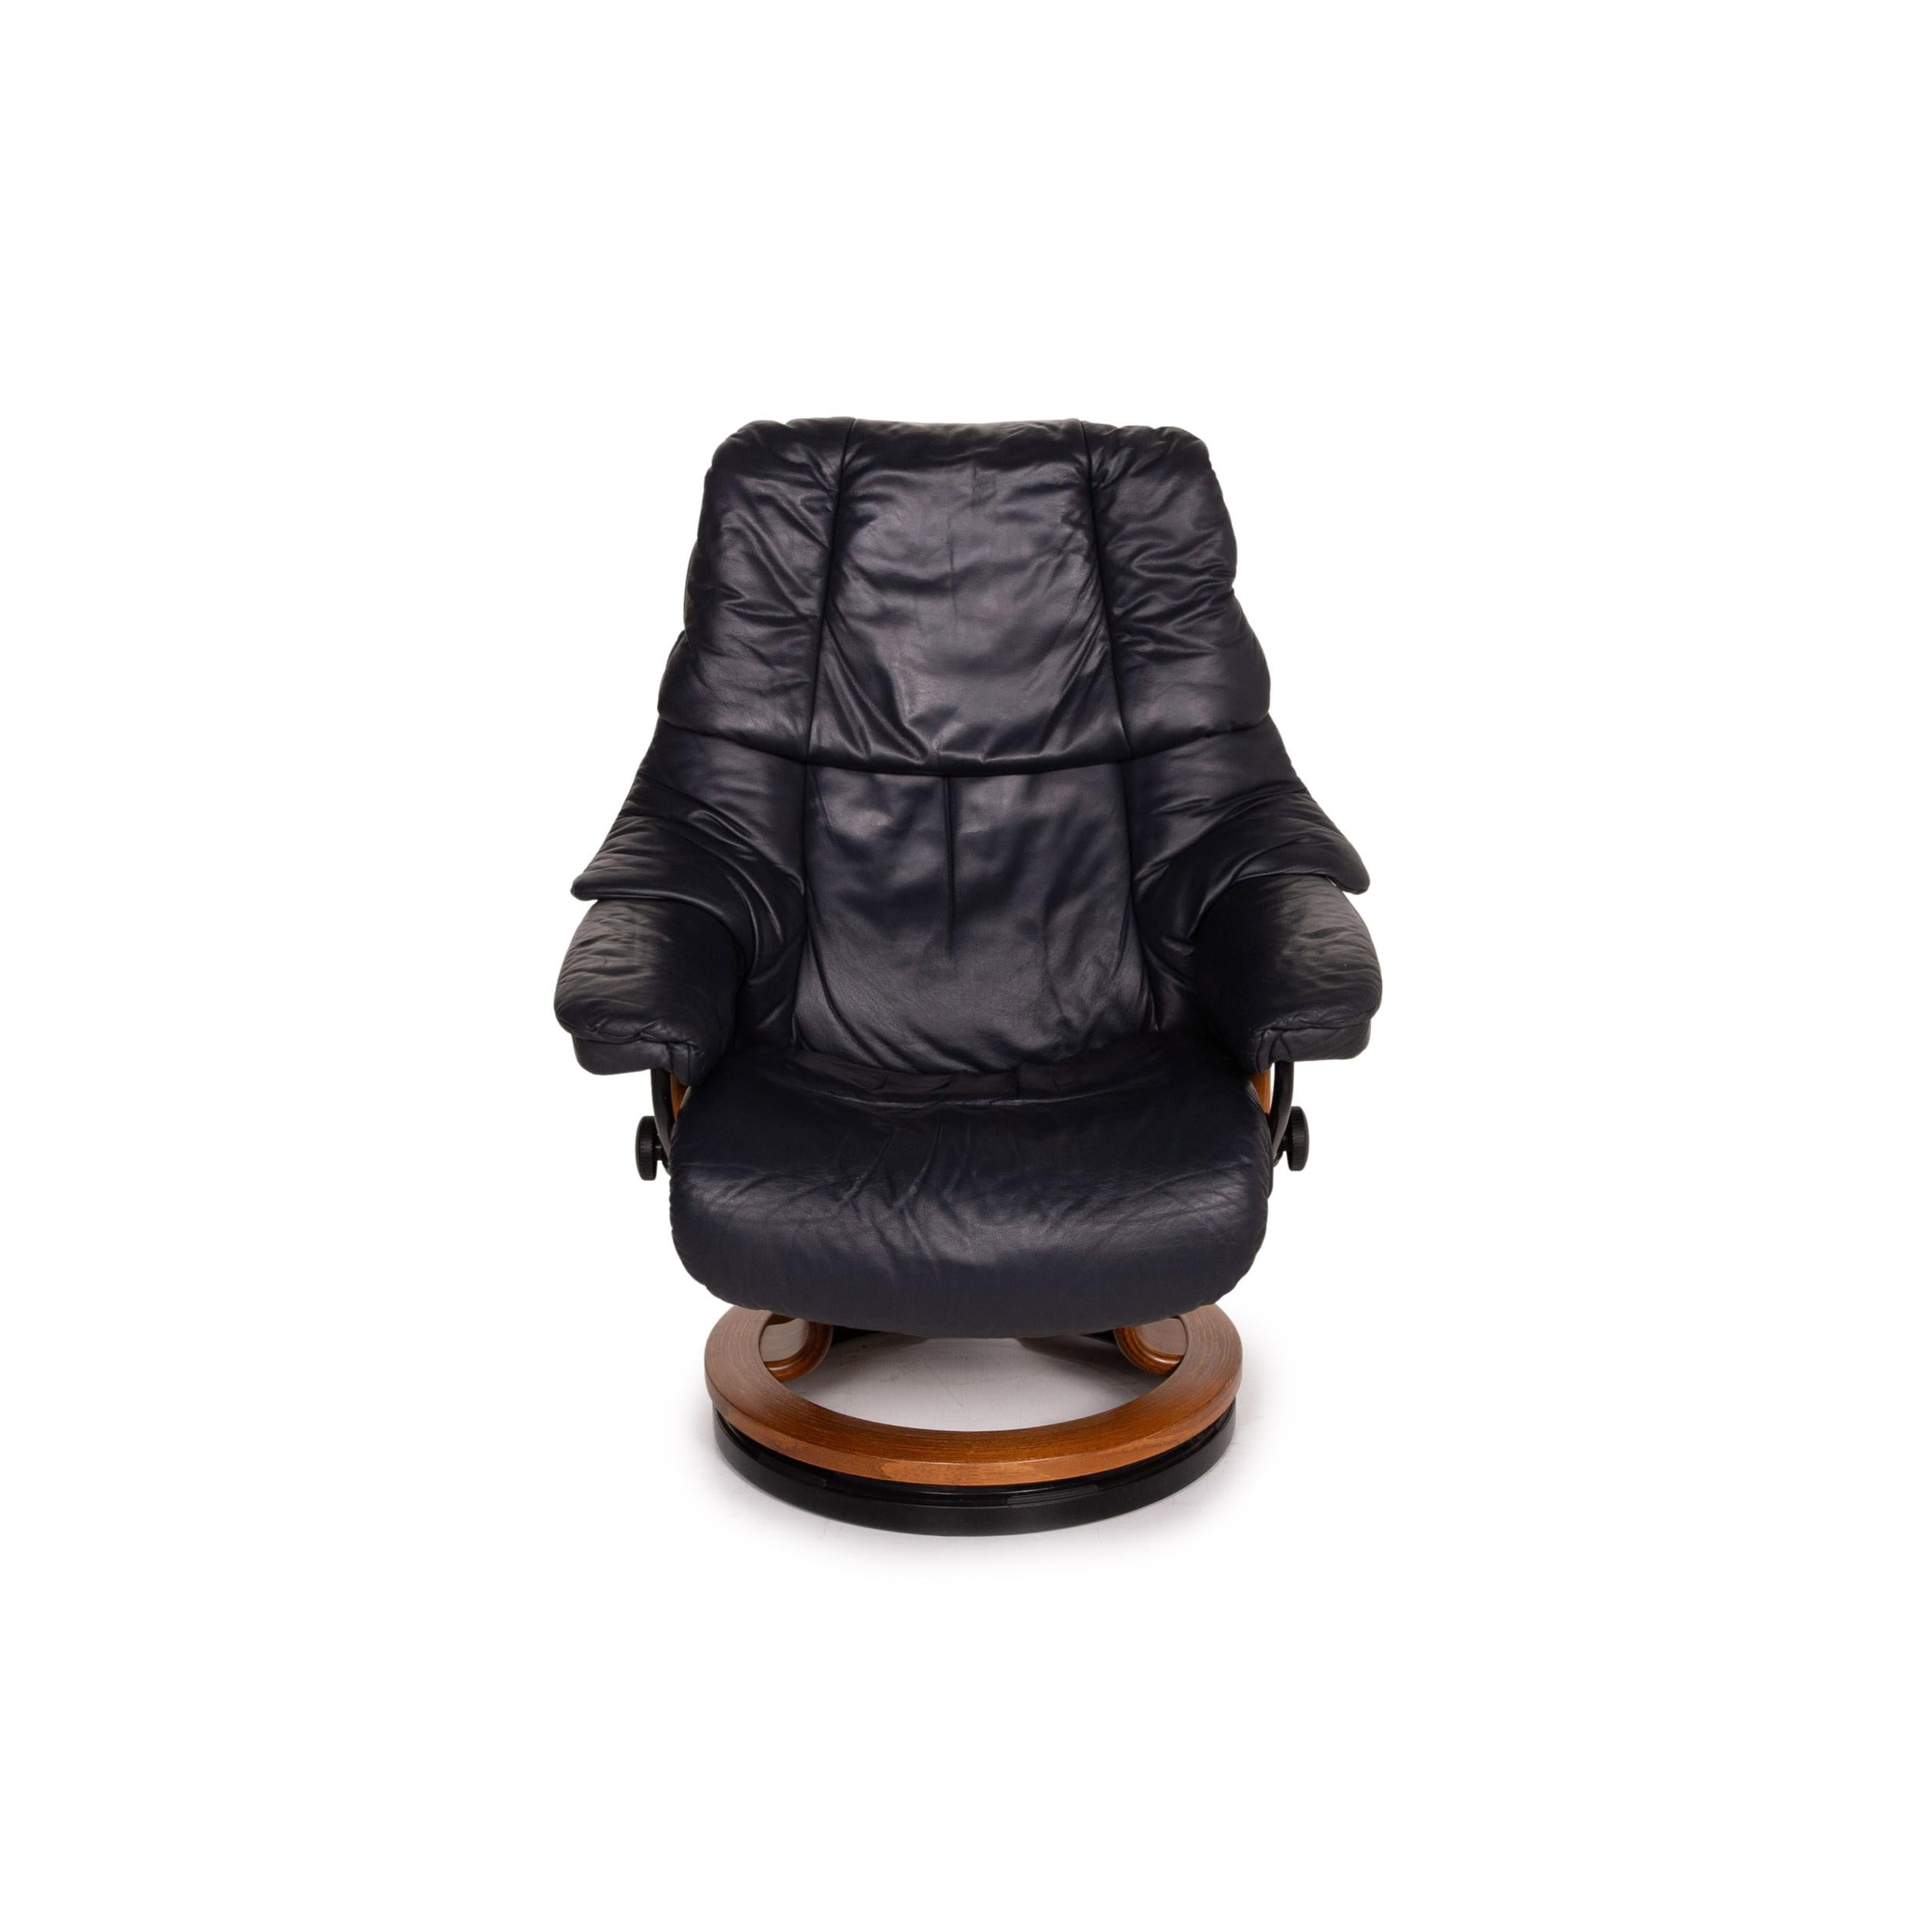 Stressless Reno Leather Armchair Incl. Stool Dark Blue Blue Relaxation Function 5